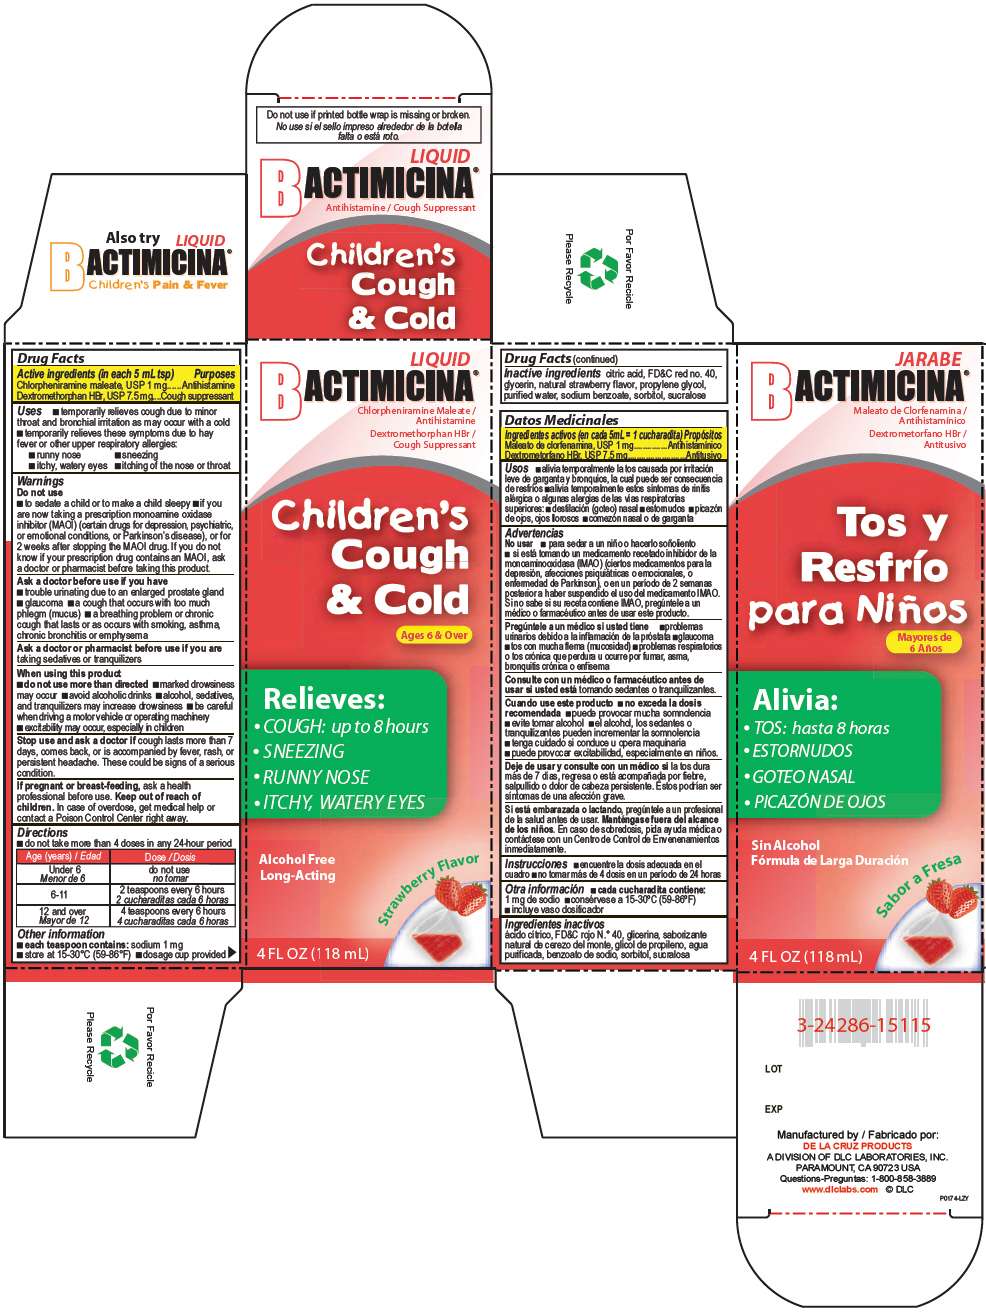 Bactimicina Childrens Cough and Cold